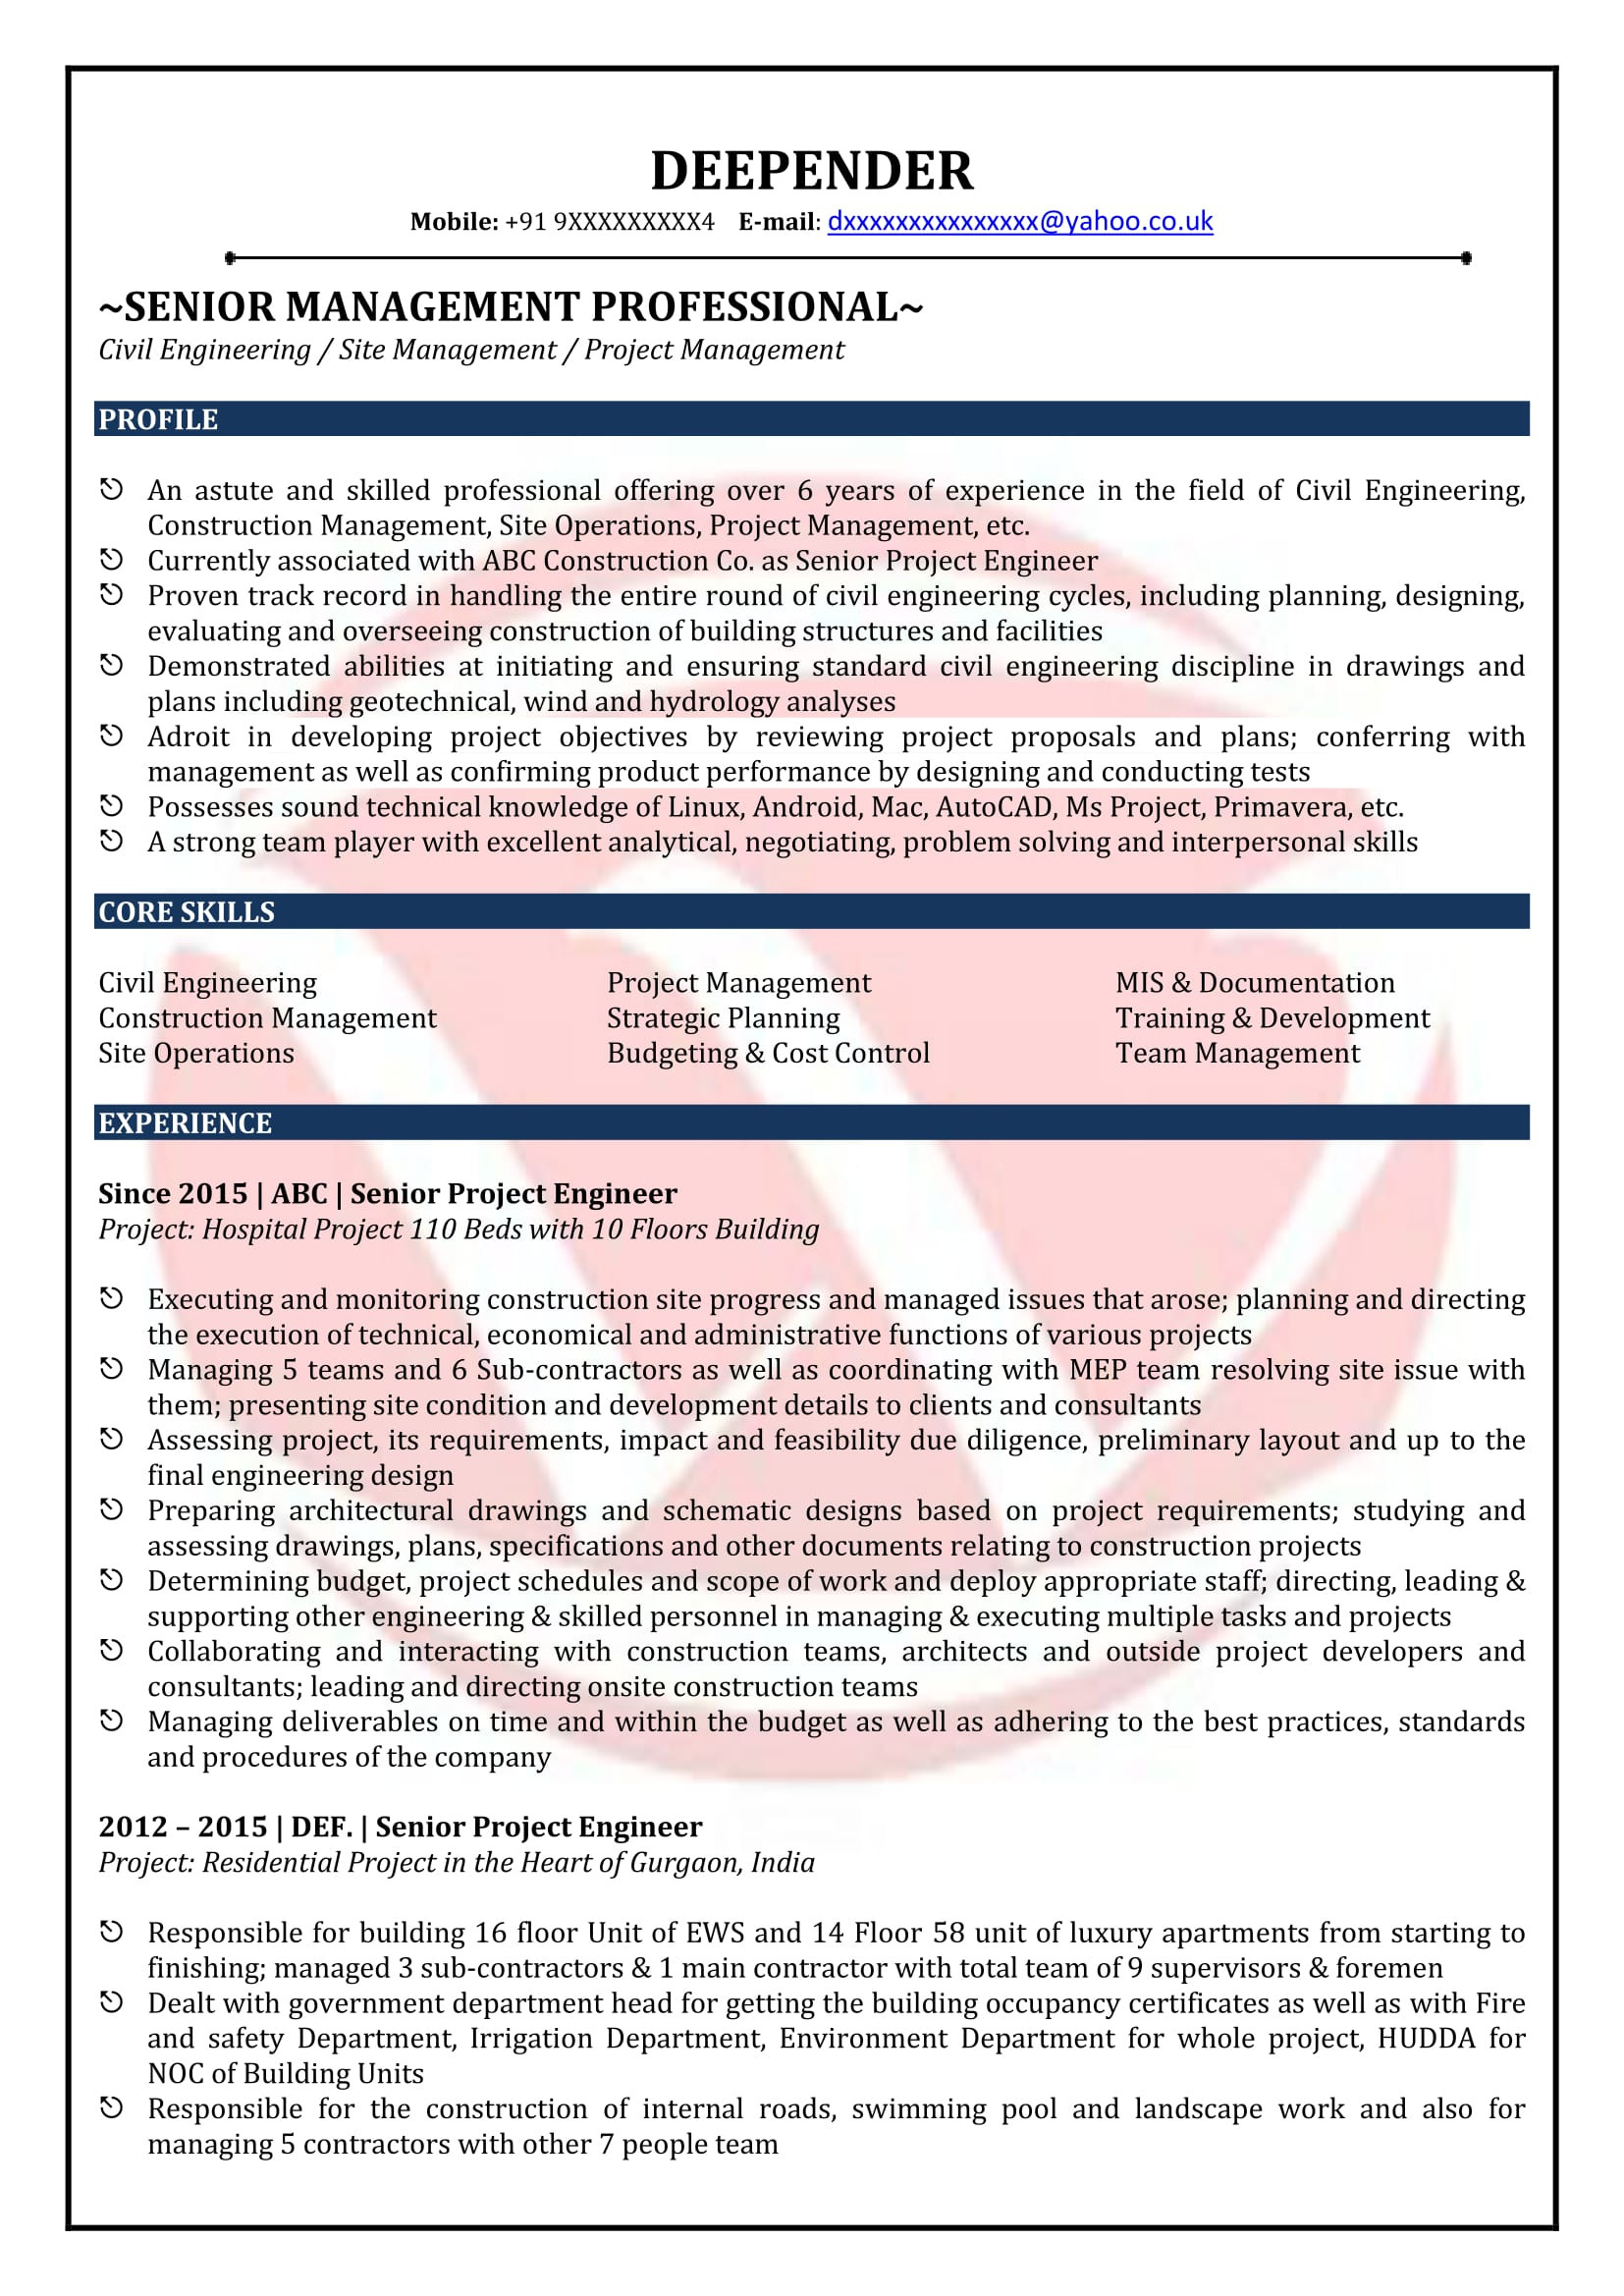 Civil Engineering Resume Samples for Freshers Pdf Civil Engineer Sample Resumes, Download Resume format Templates!